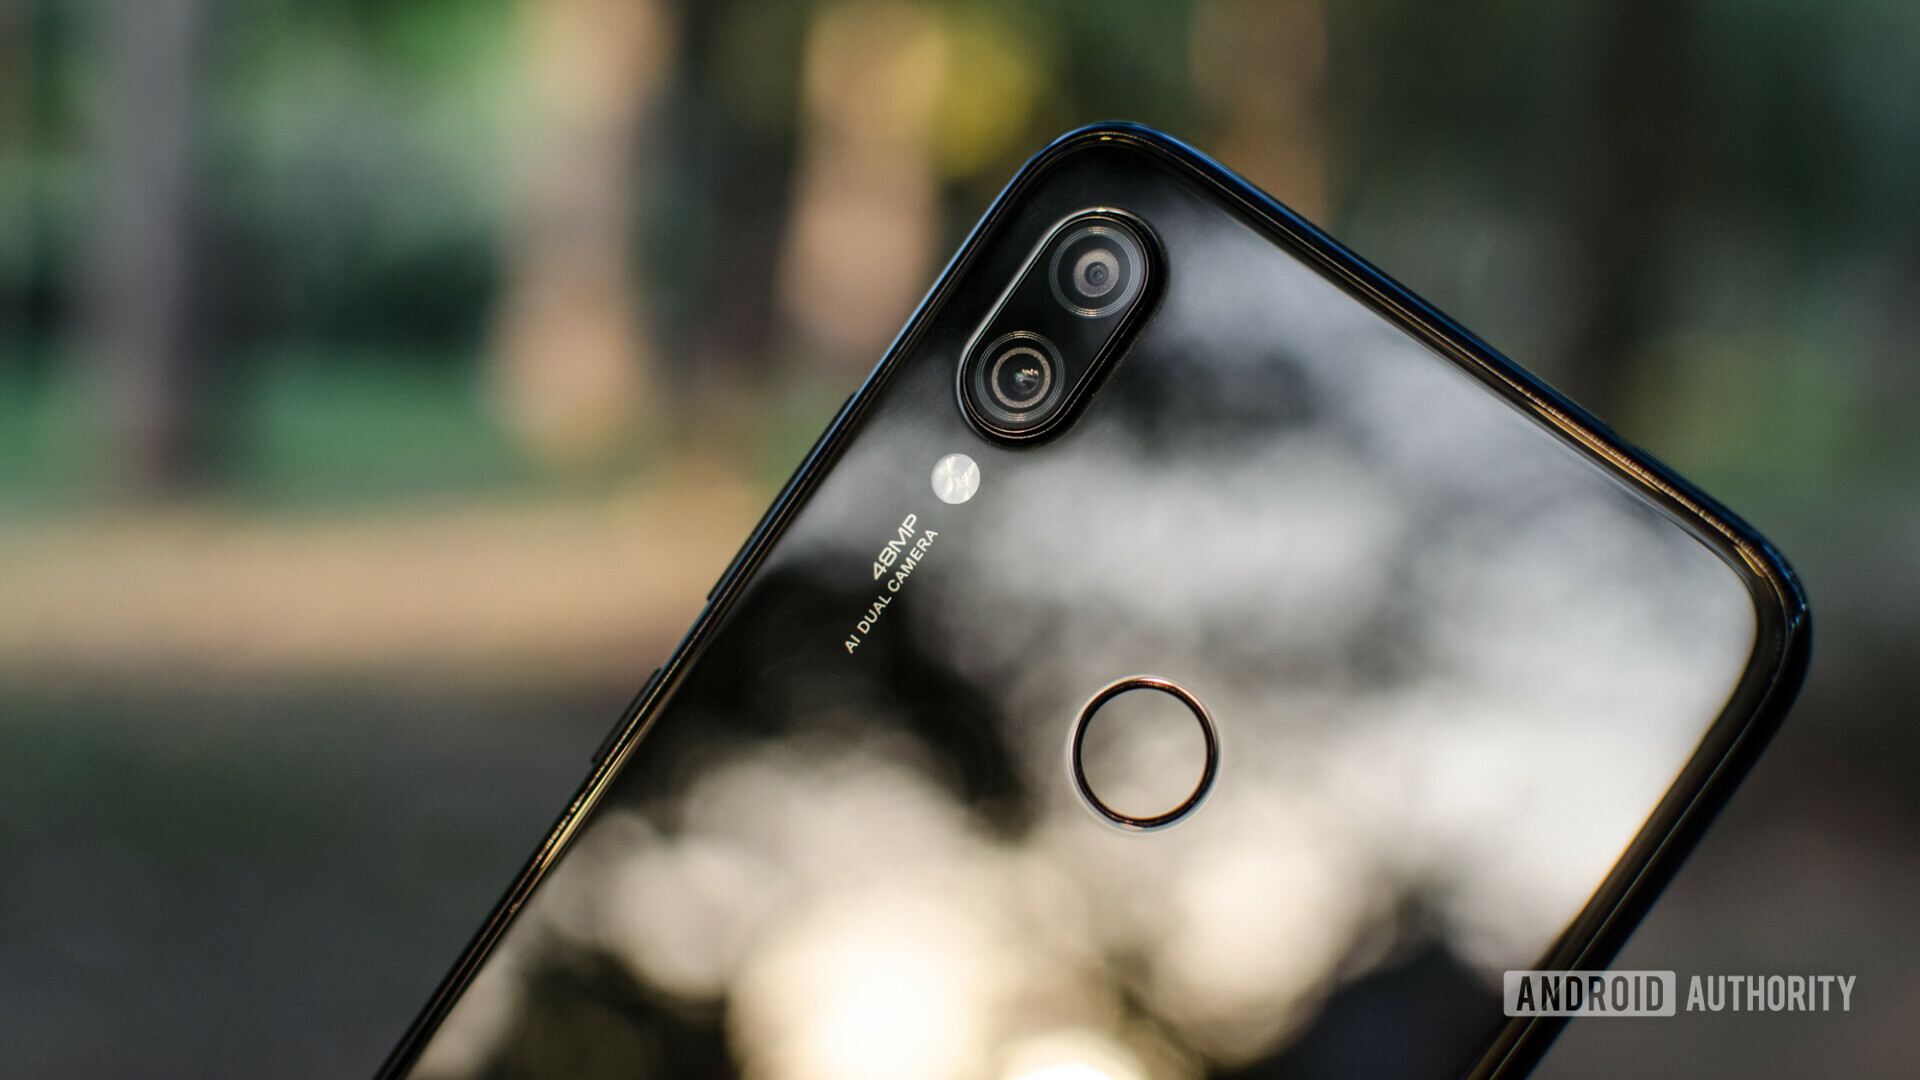 The Redmi Note 7 Pro with its 48MP camera.